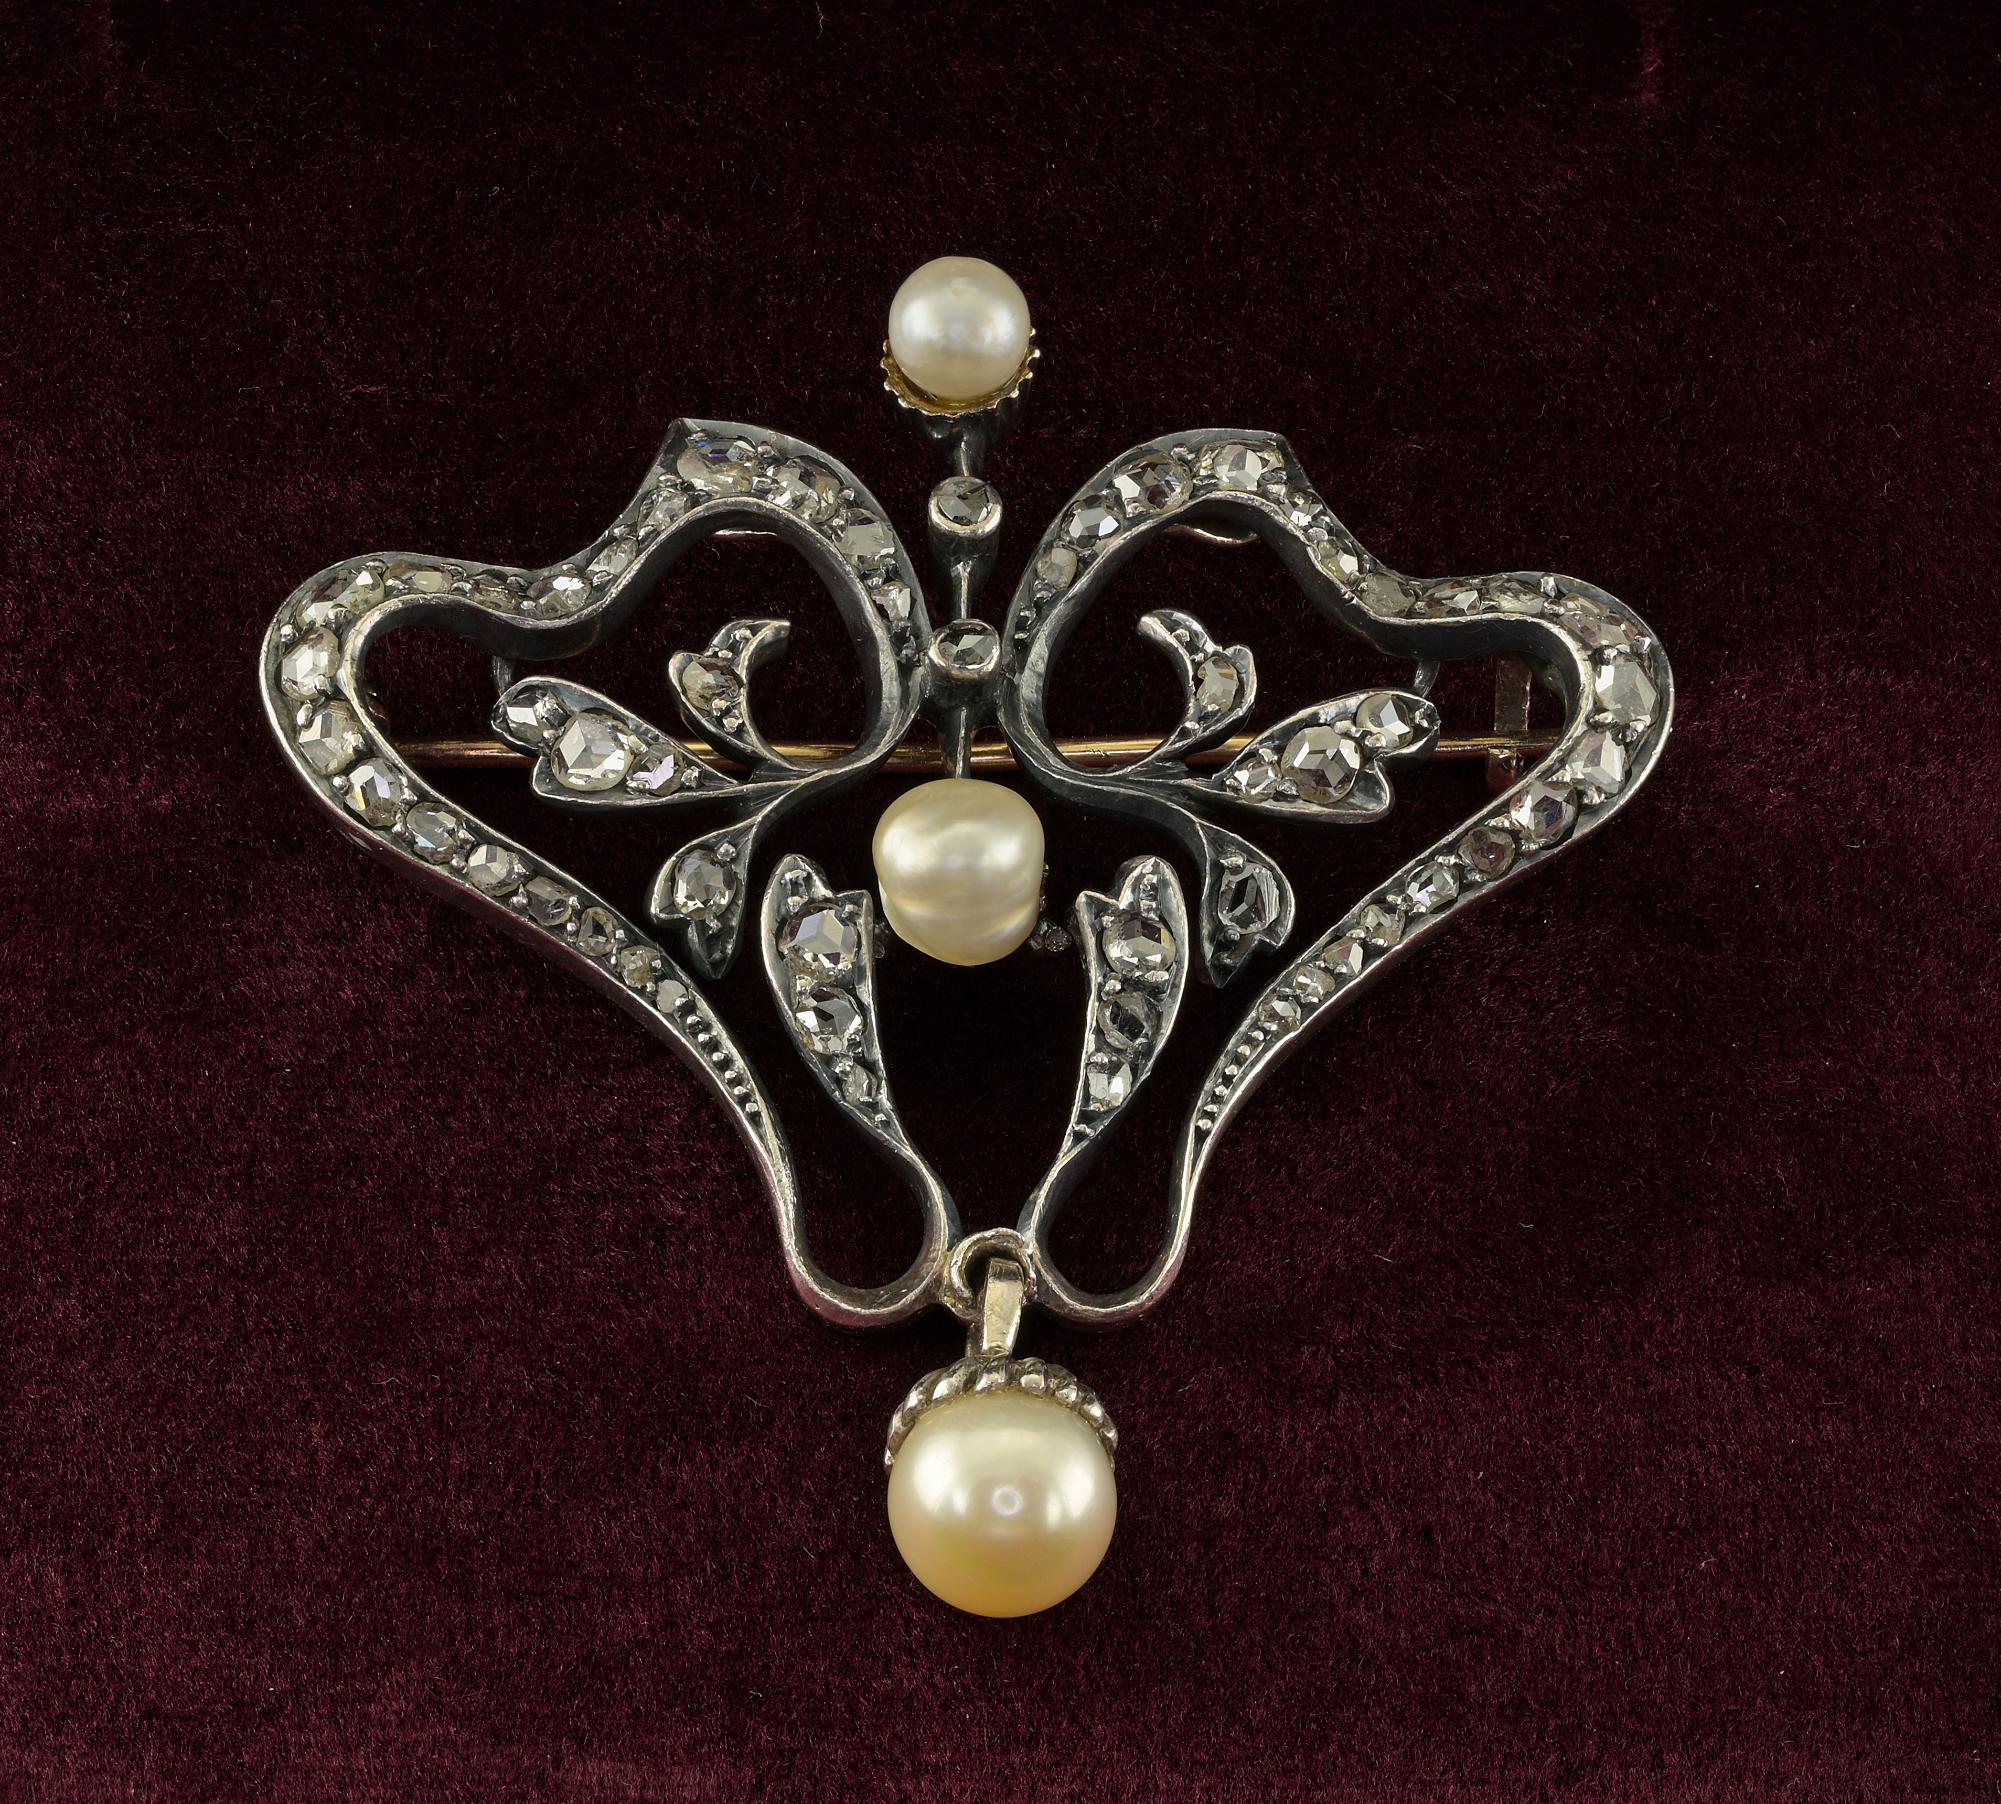 An authentic Art Nouveau period lavaliere brooch, hand crafted during 1900 ca of solid 18 KT gold topped by silver
Sinuous curve-linear forms given and the leaf work interlaced in a classic design which made Art Nouveau so unique and desirable